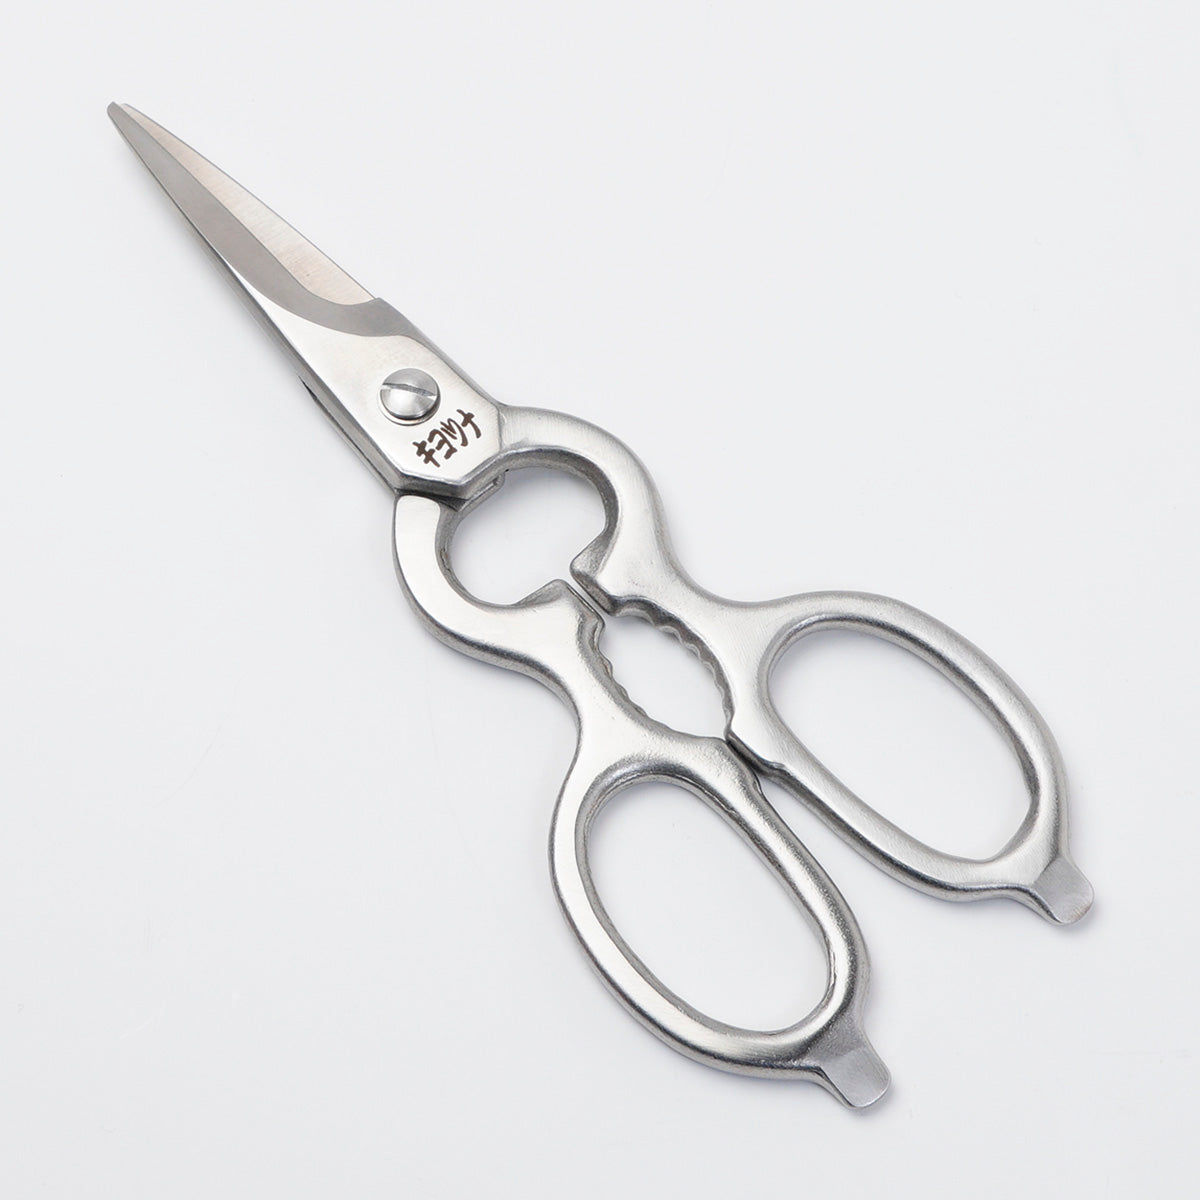 MIMATSU Kitchen Scissors Removable Hand Made 152g - Made in Japan 